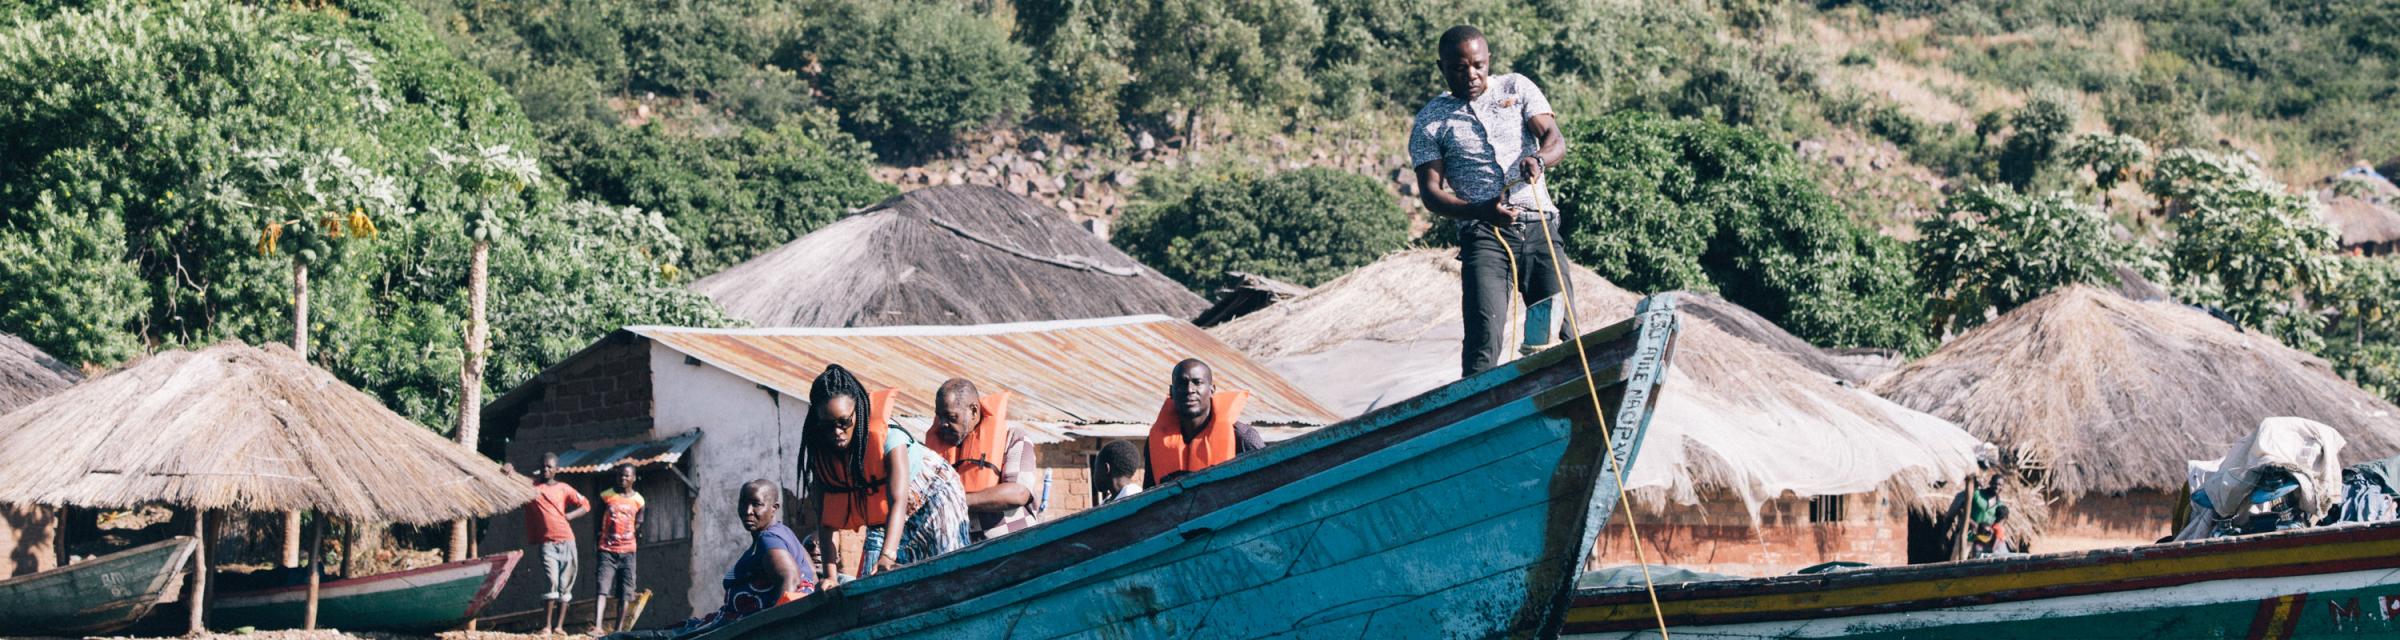 Lake Tanganyika missionaries travelling on a boat to different villages.